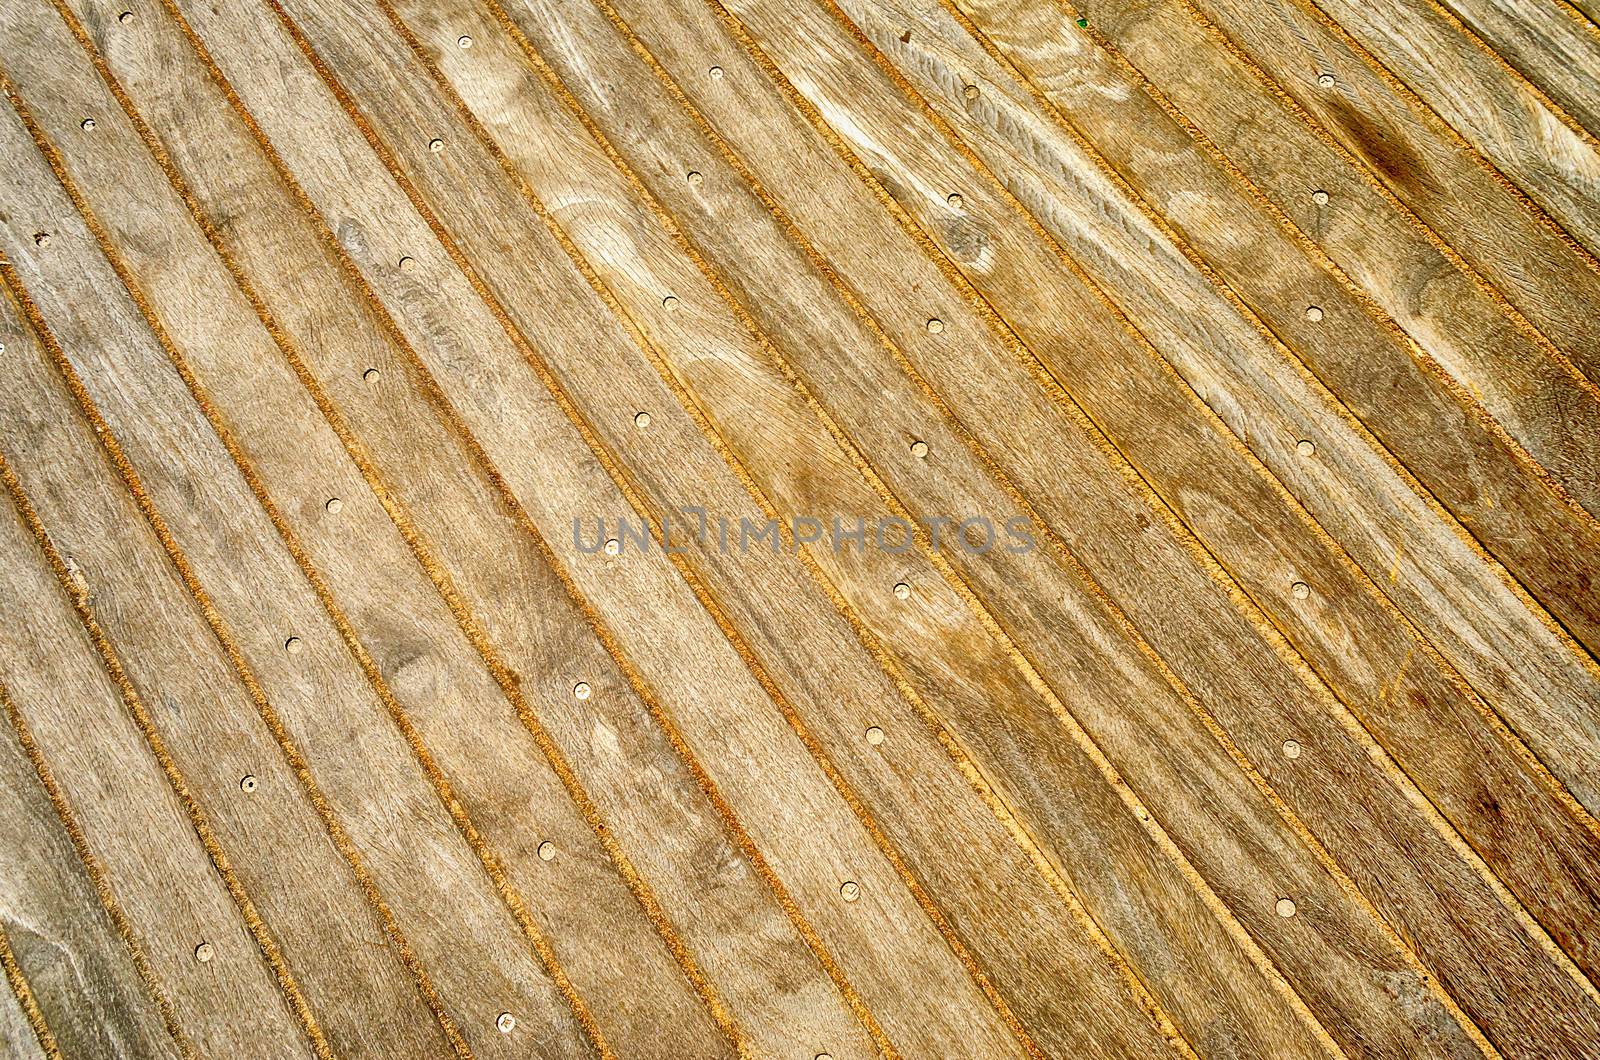 Wooden Boardwalk Background, Weathered and rough textured